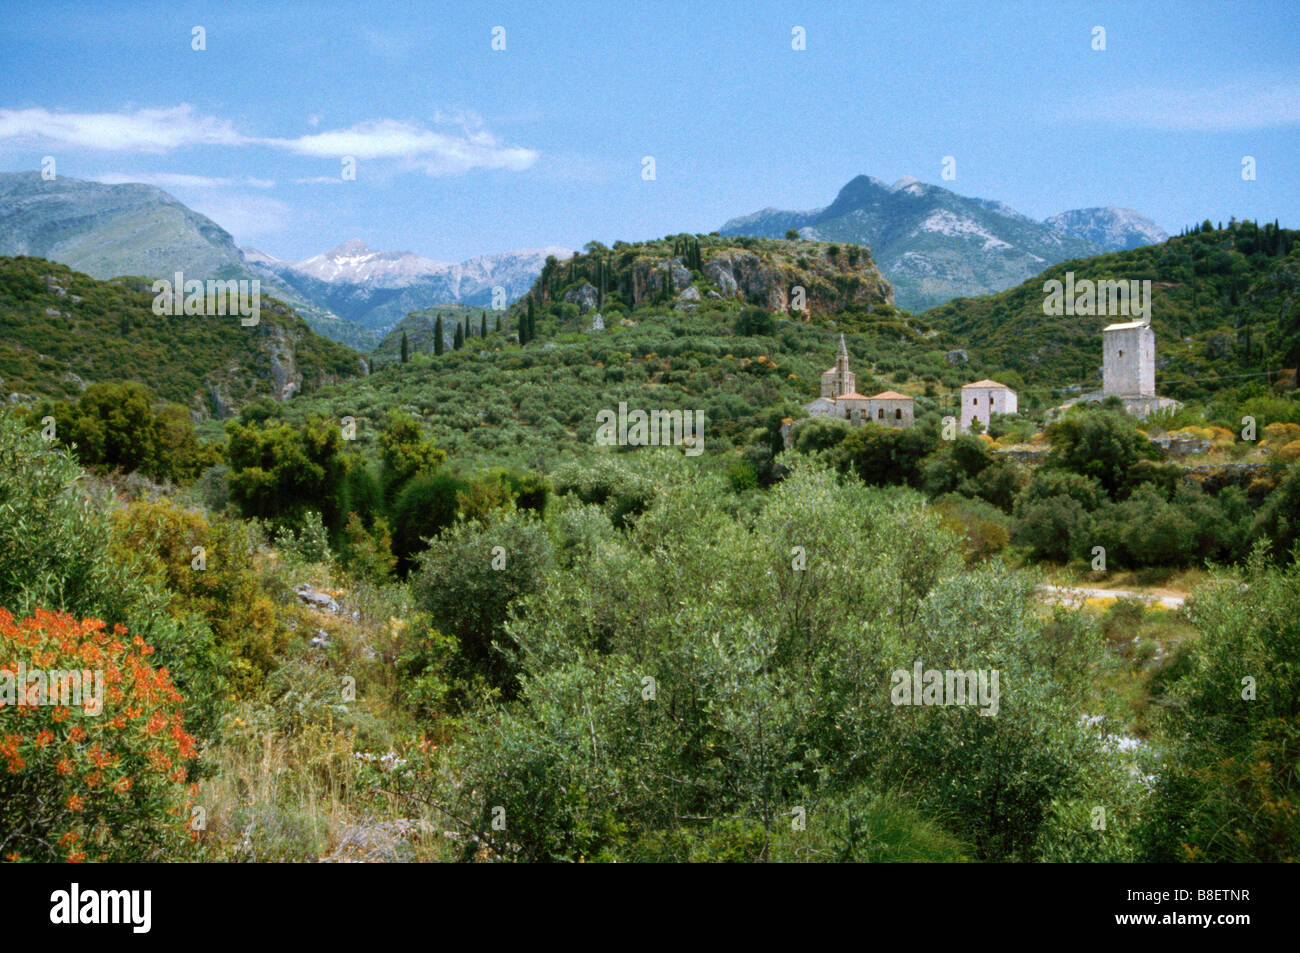 View of Taygetos mountains and ancient stone tower house from Kardamyli, Mani Peninsula, Peloponnese, Greece - early summer Stock Photo